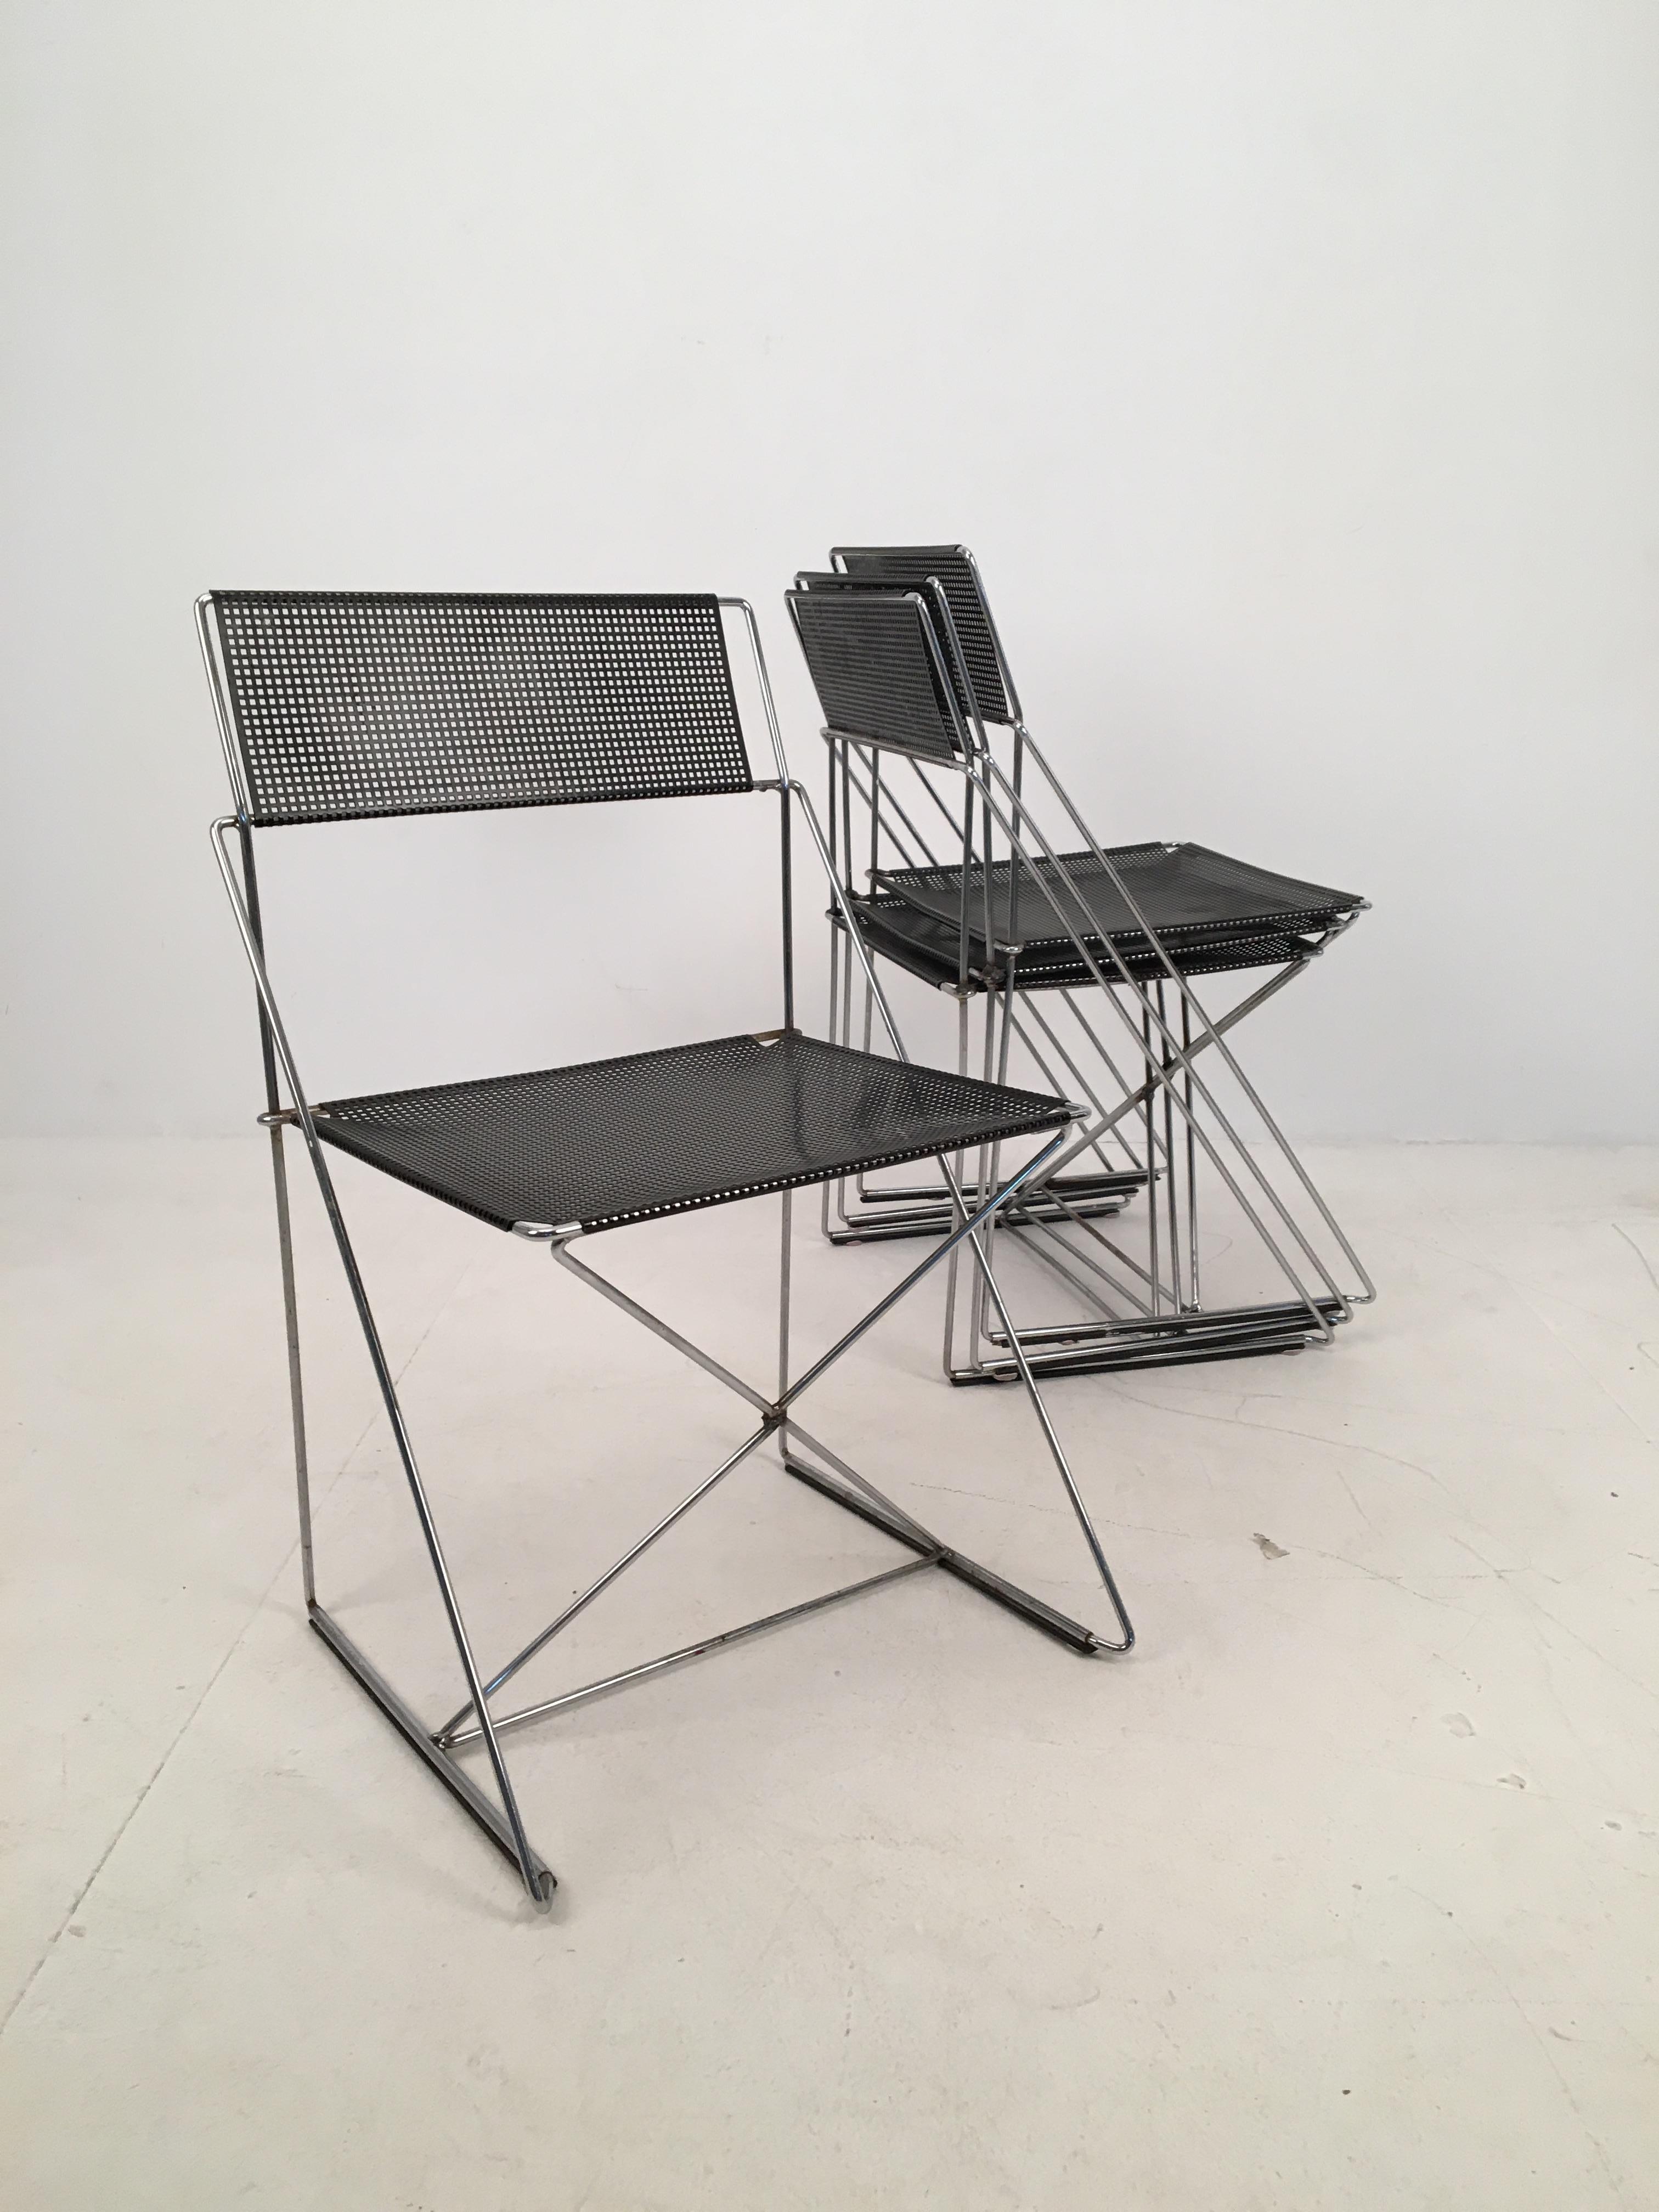 Set of 4 Mid-Century Modern ‘X-Line’ metal stacking chairs designed by Niels Jørgen Haugesen and produced by Hybodan in Copenhagen, Denmark, circa 1970.

Industrial meets Postmodern meet Minimalist, these chairs are very sculptural in appearance